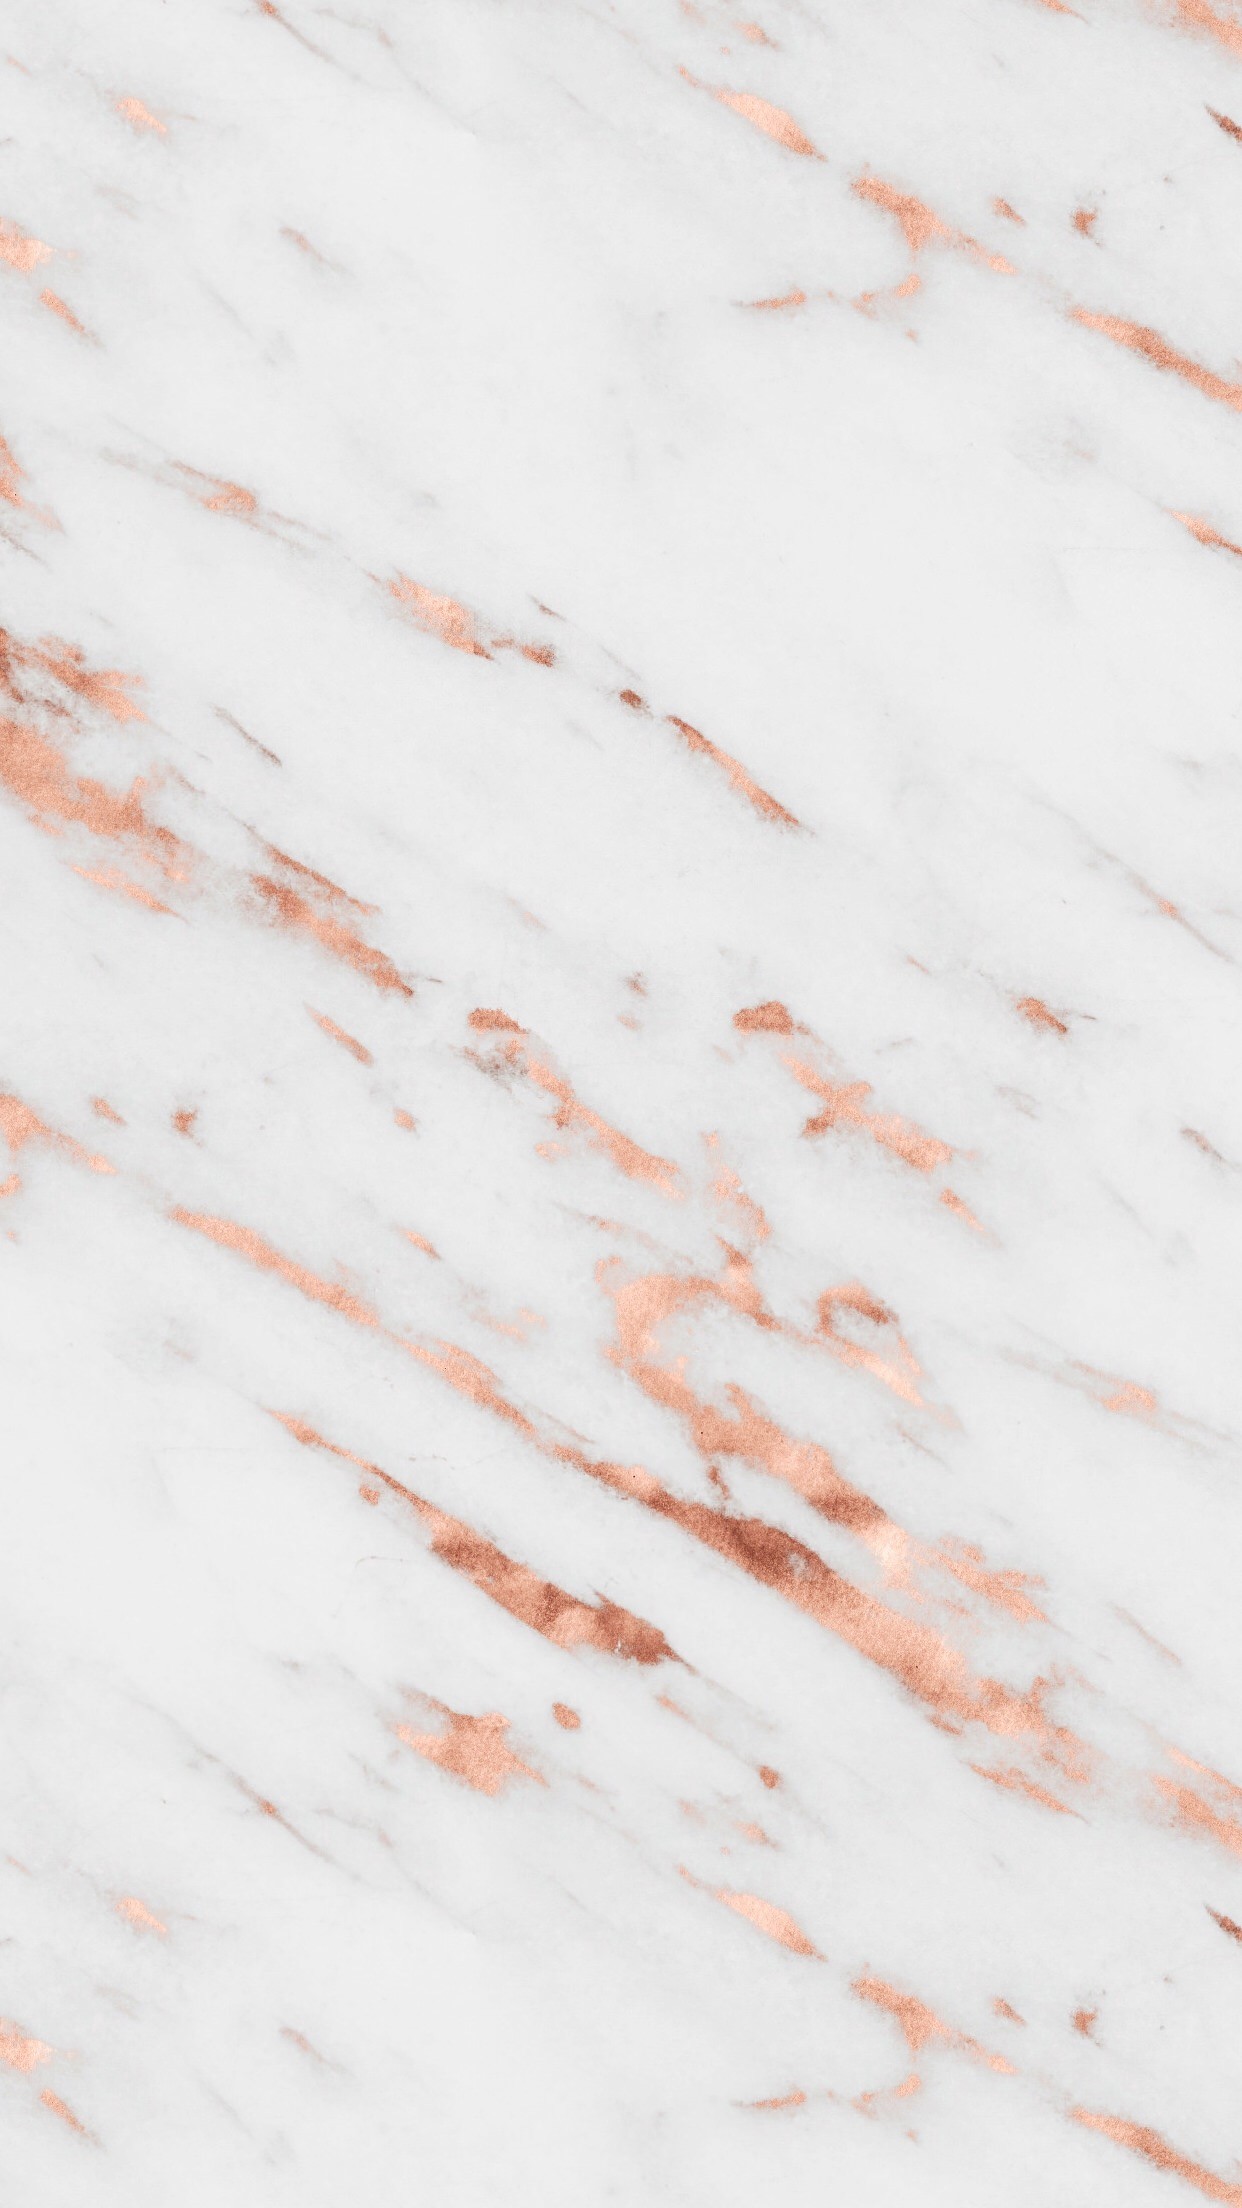 This rose gold marble wallpaper for your iPhone is so gorgeous!